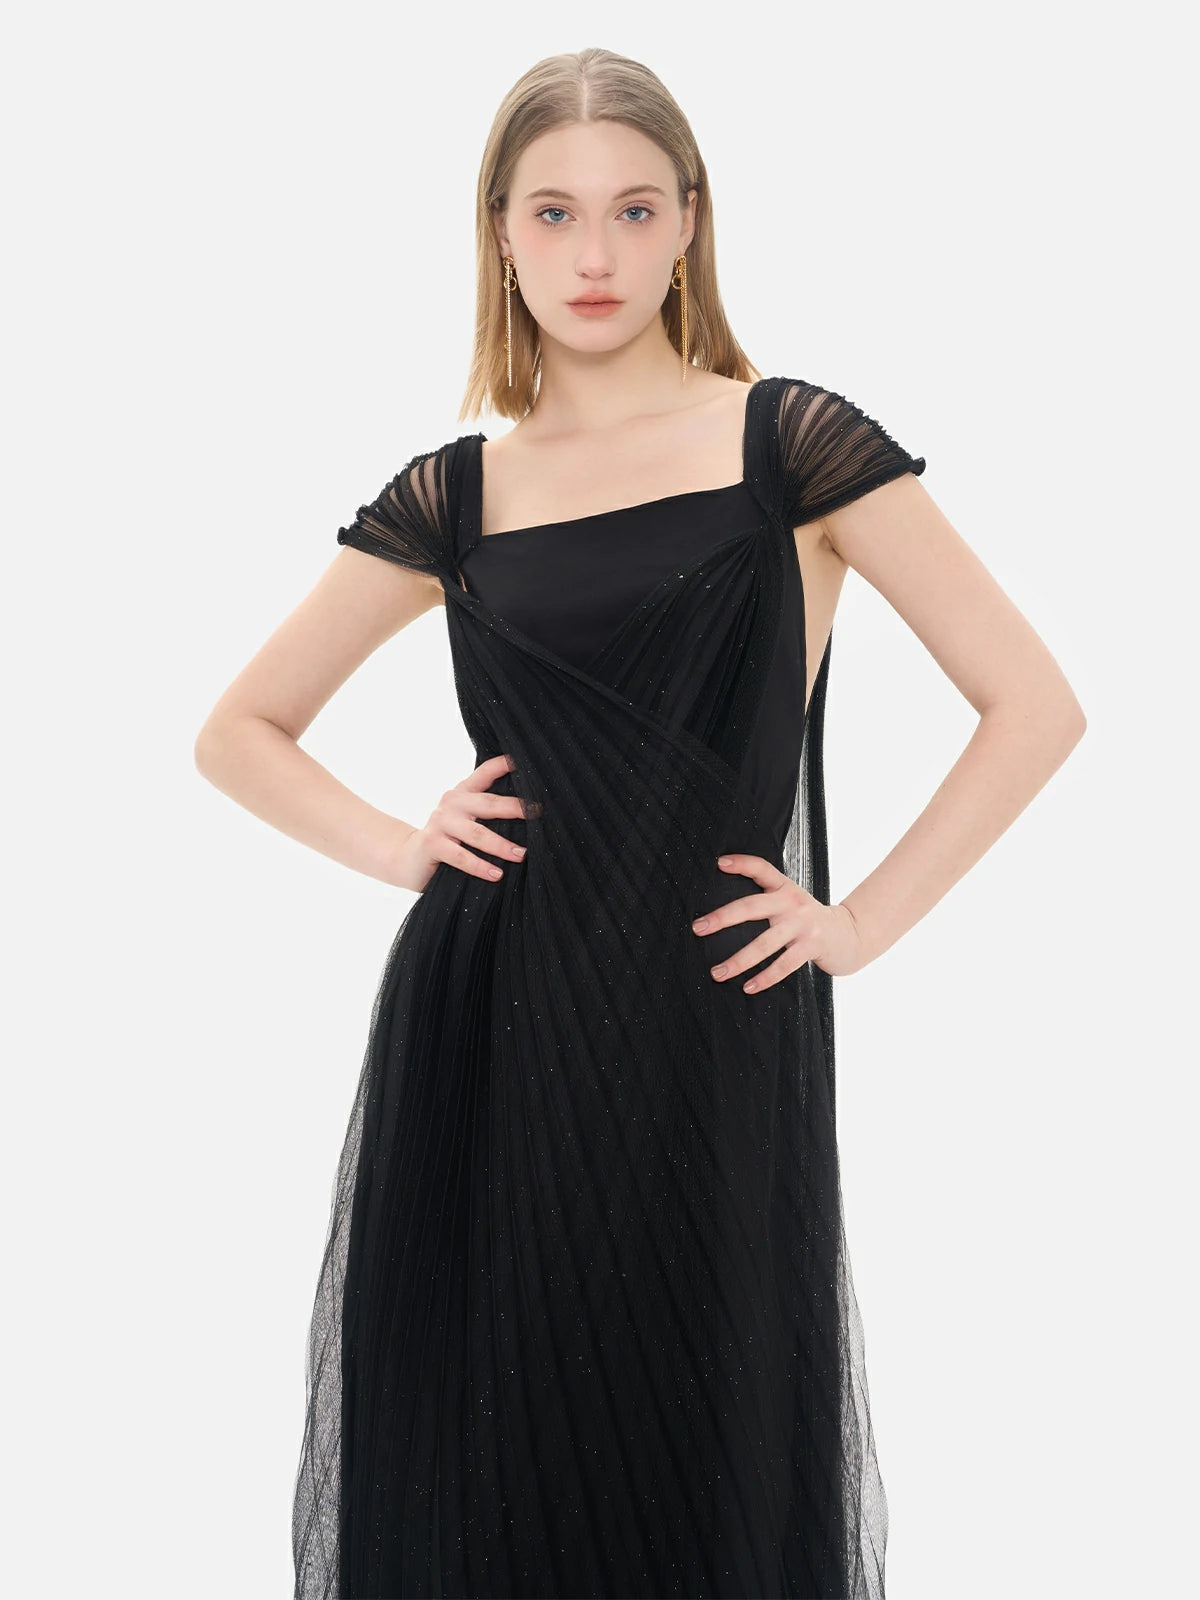 Striking evening gown in black, showcasing a sophisticated crisscross pleated mesh pattern, cap sleeves, and dazzling sequin details.